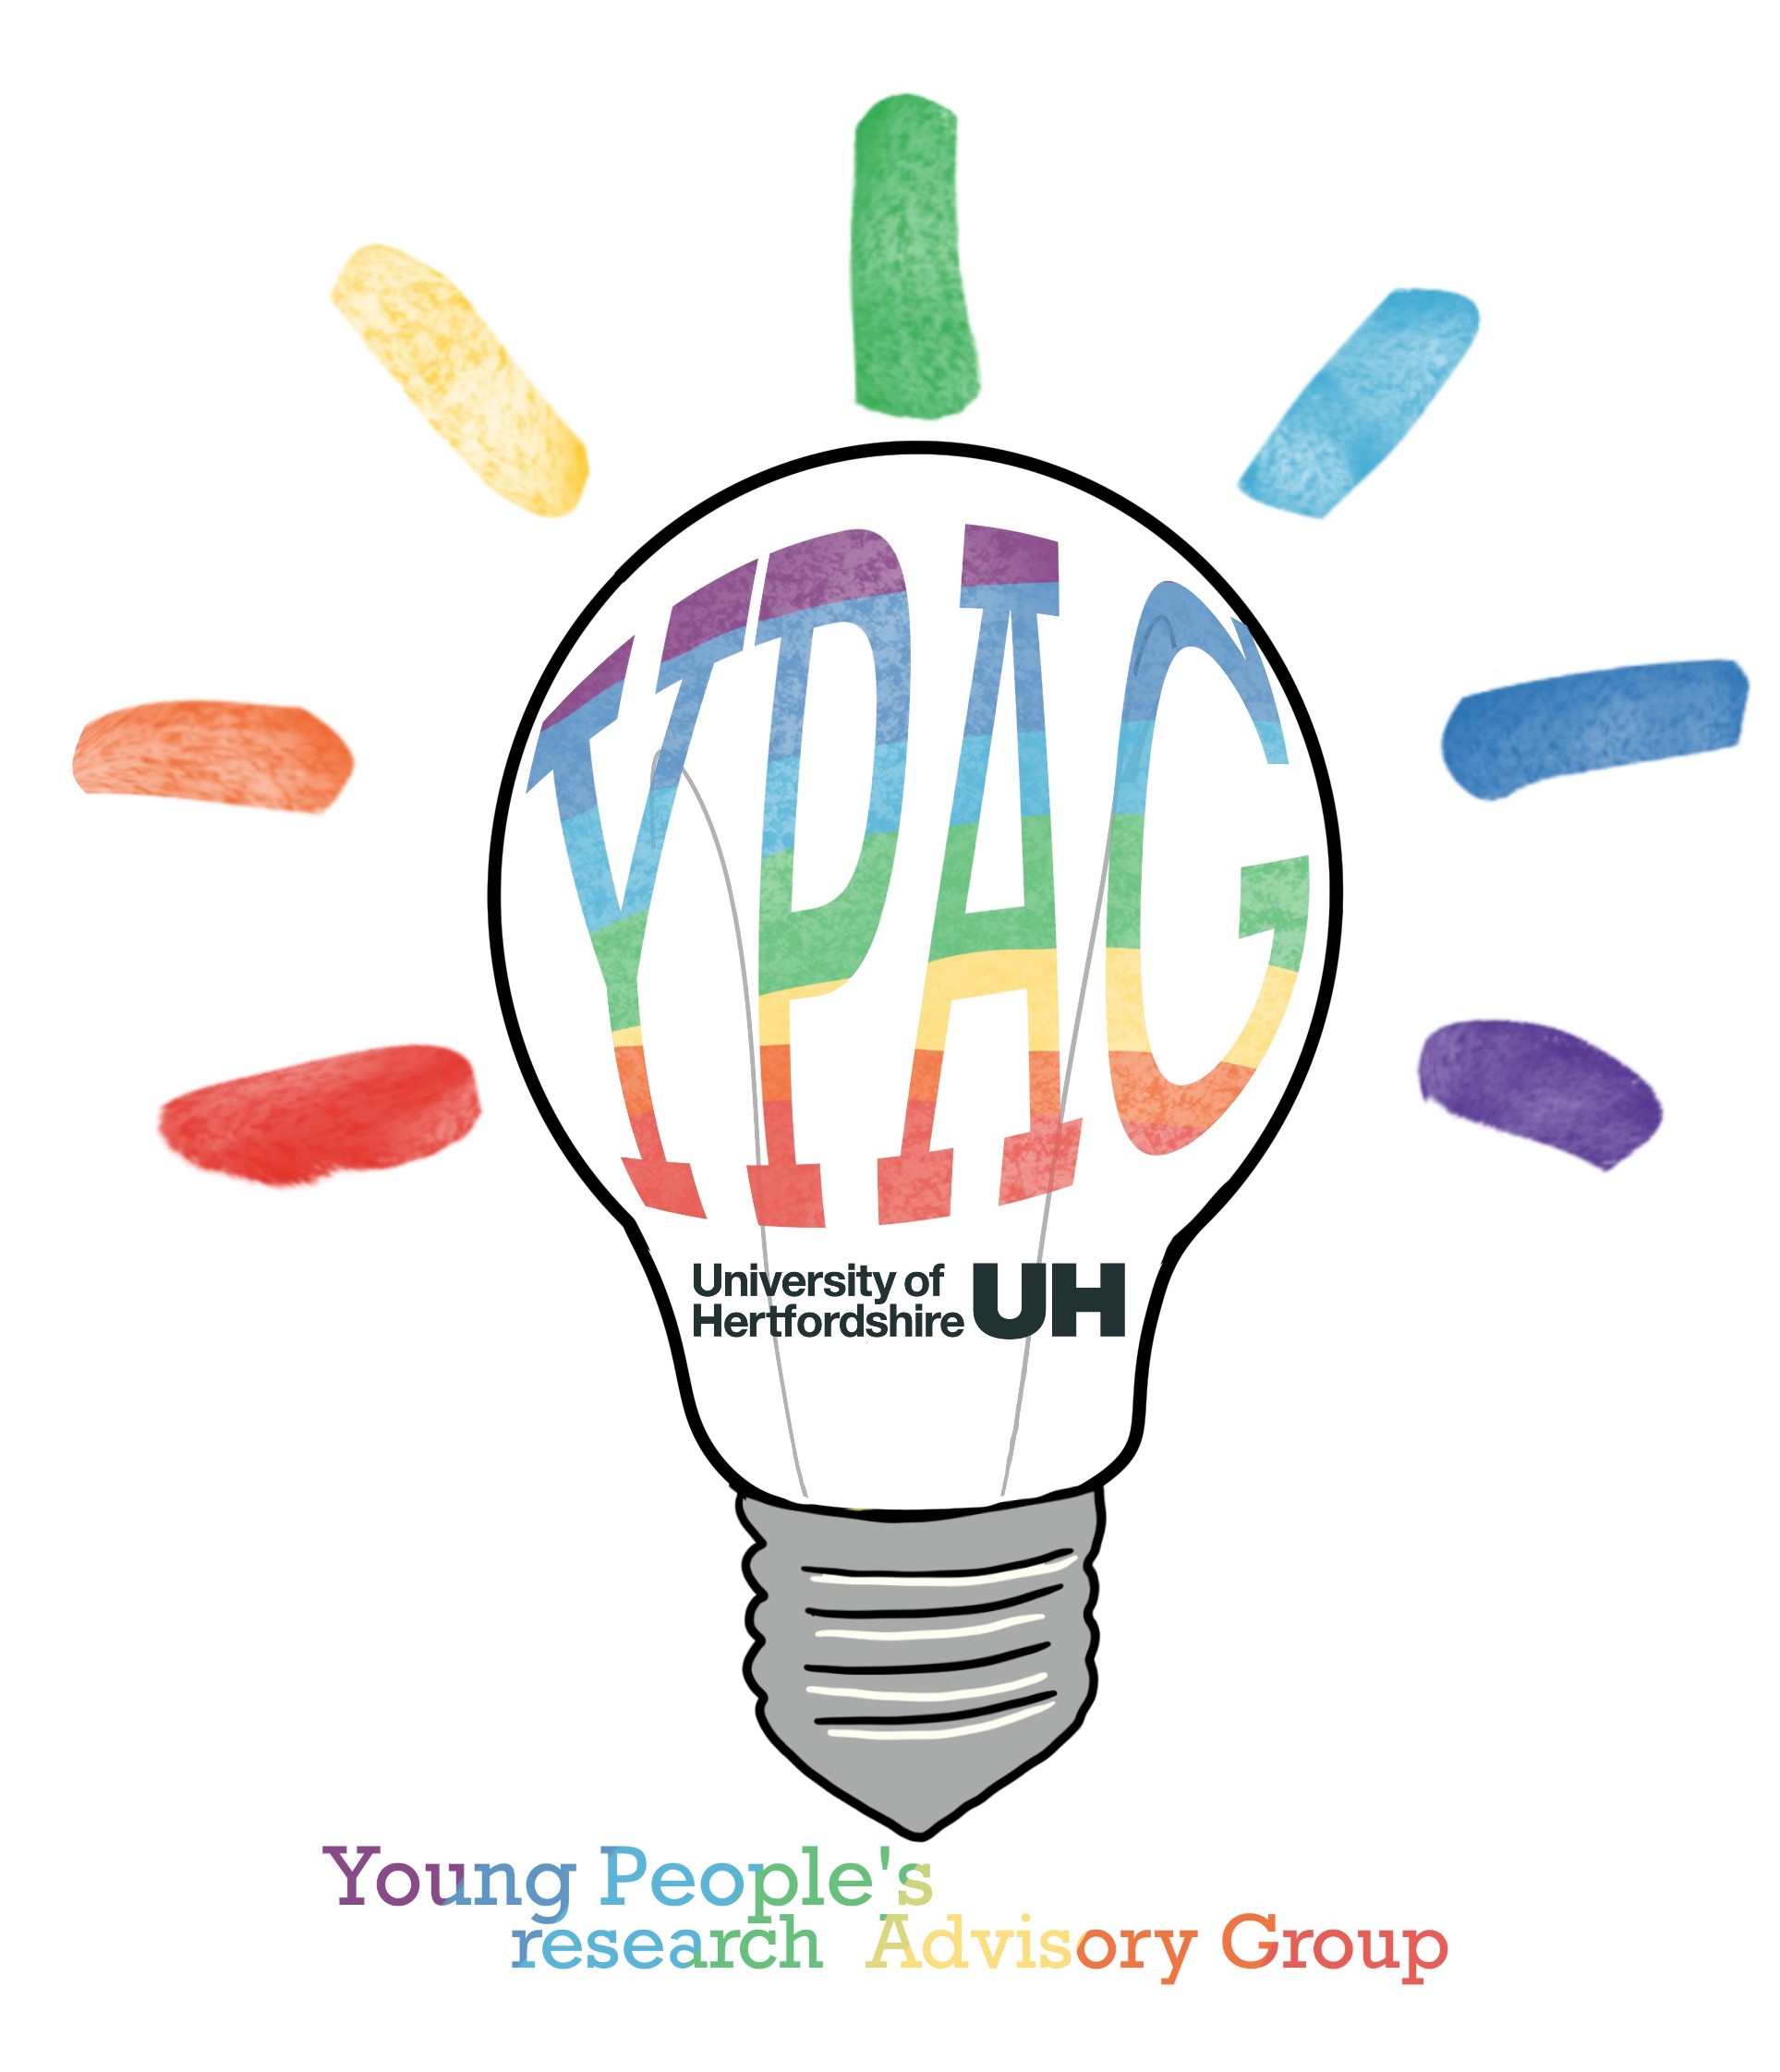 Young People's Research Advisory Group